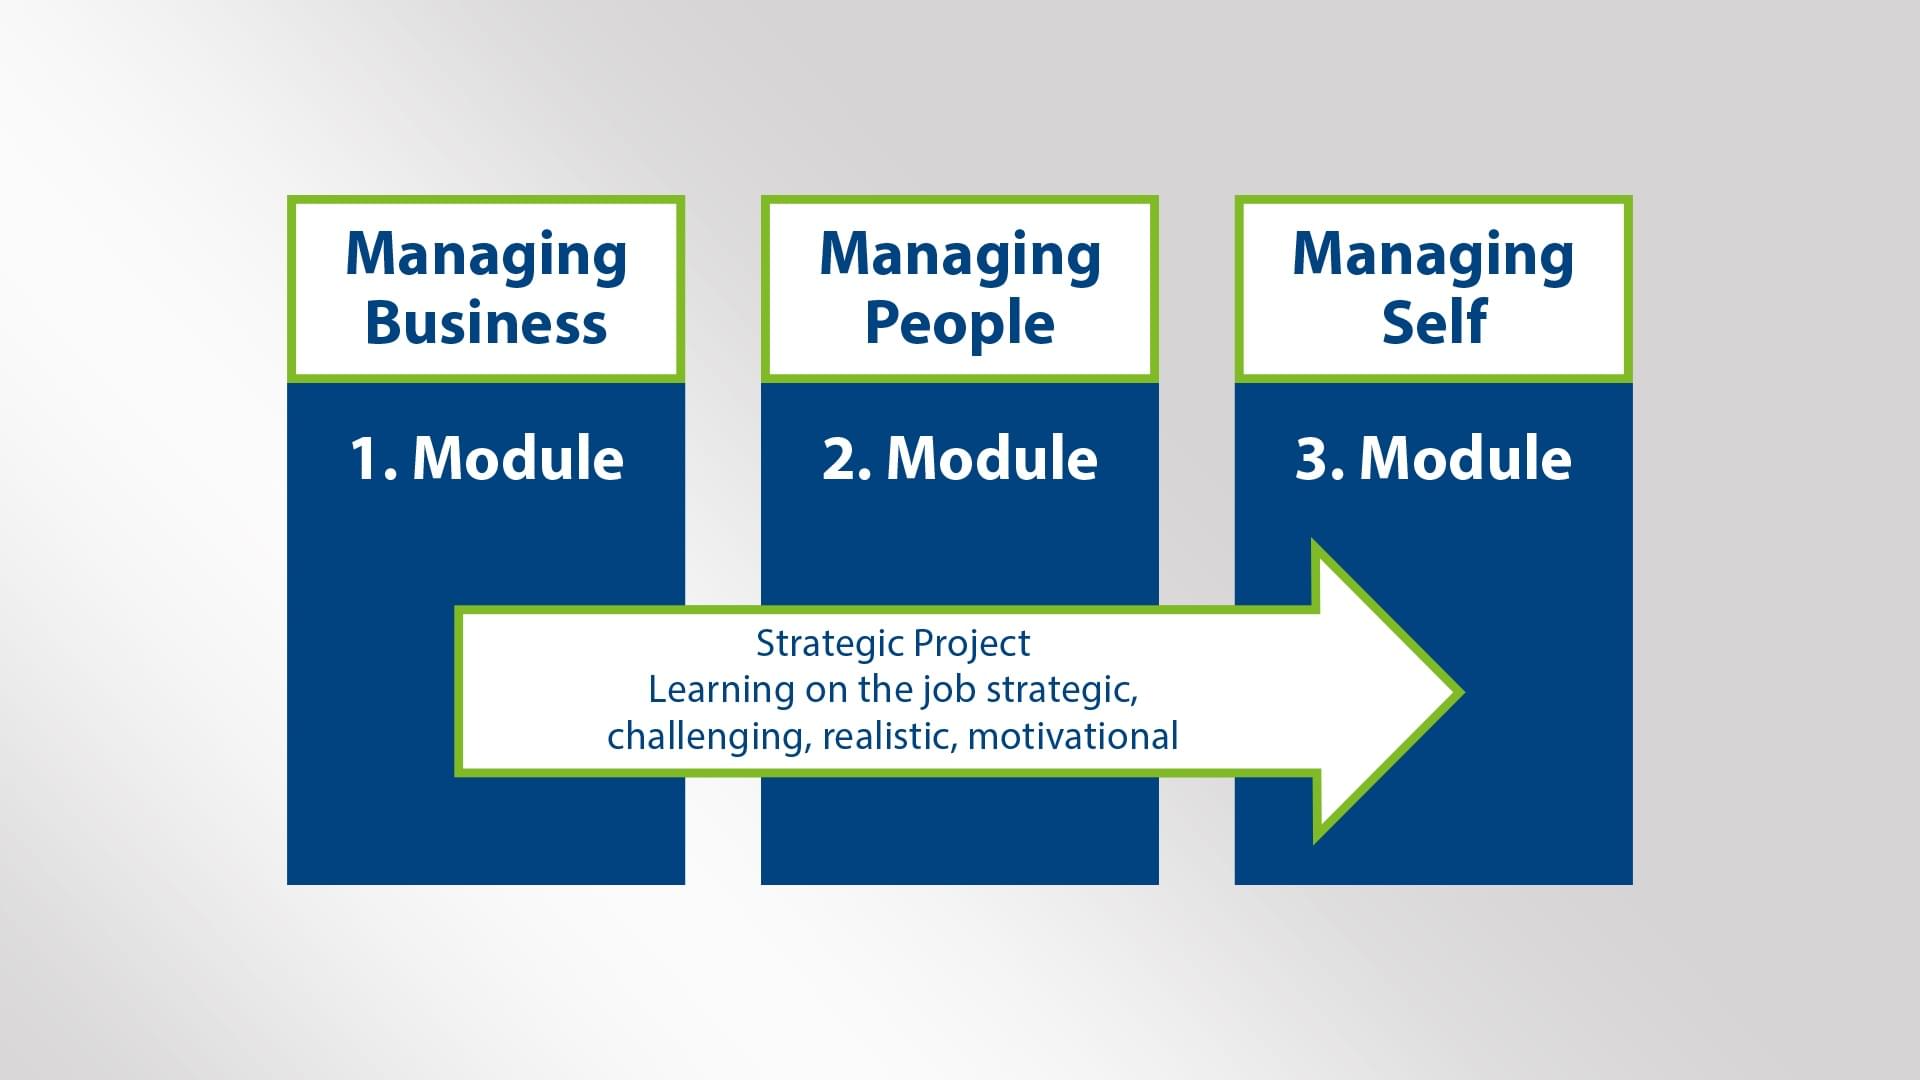 Graphical representation of three task areas of a manager: Managing Business, Managing People and Managing self.